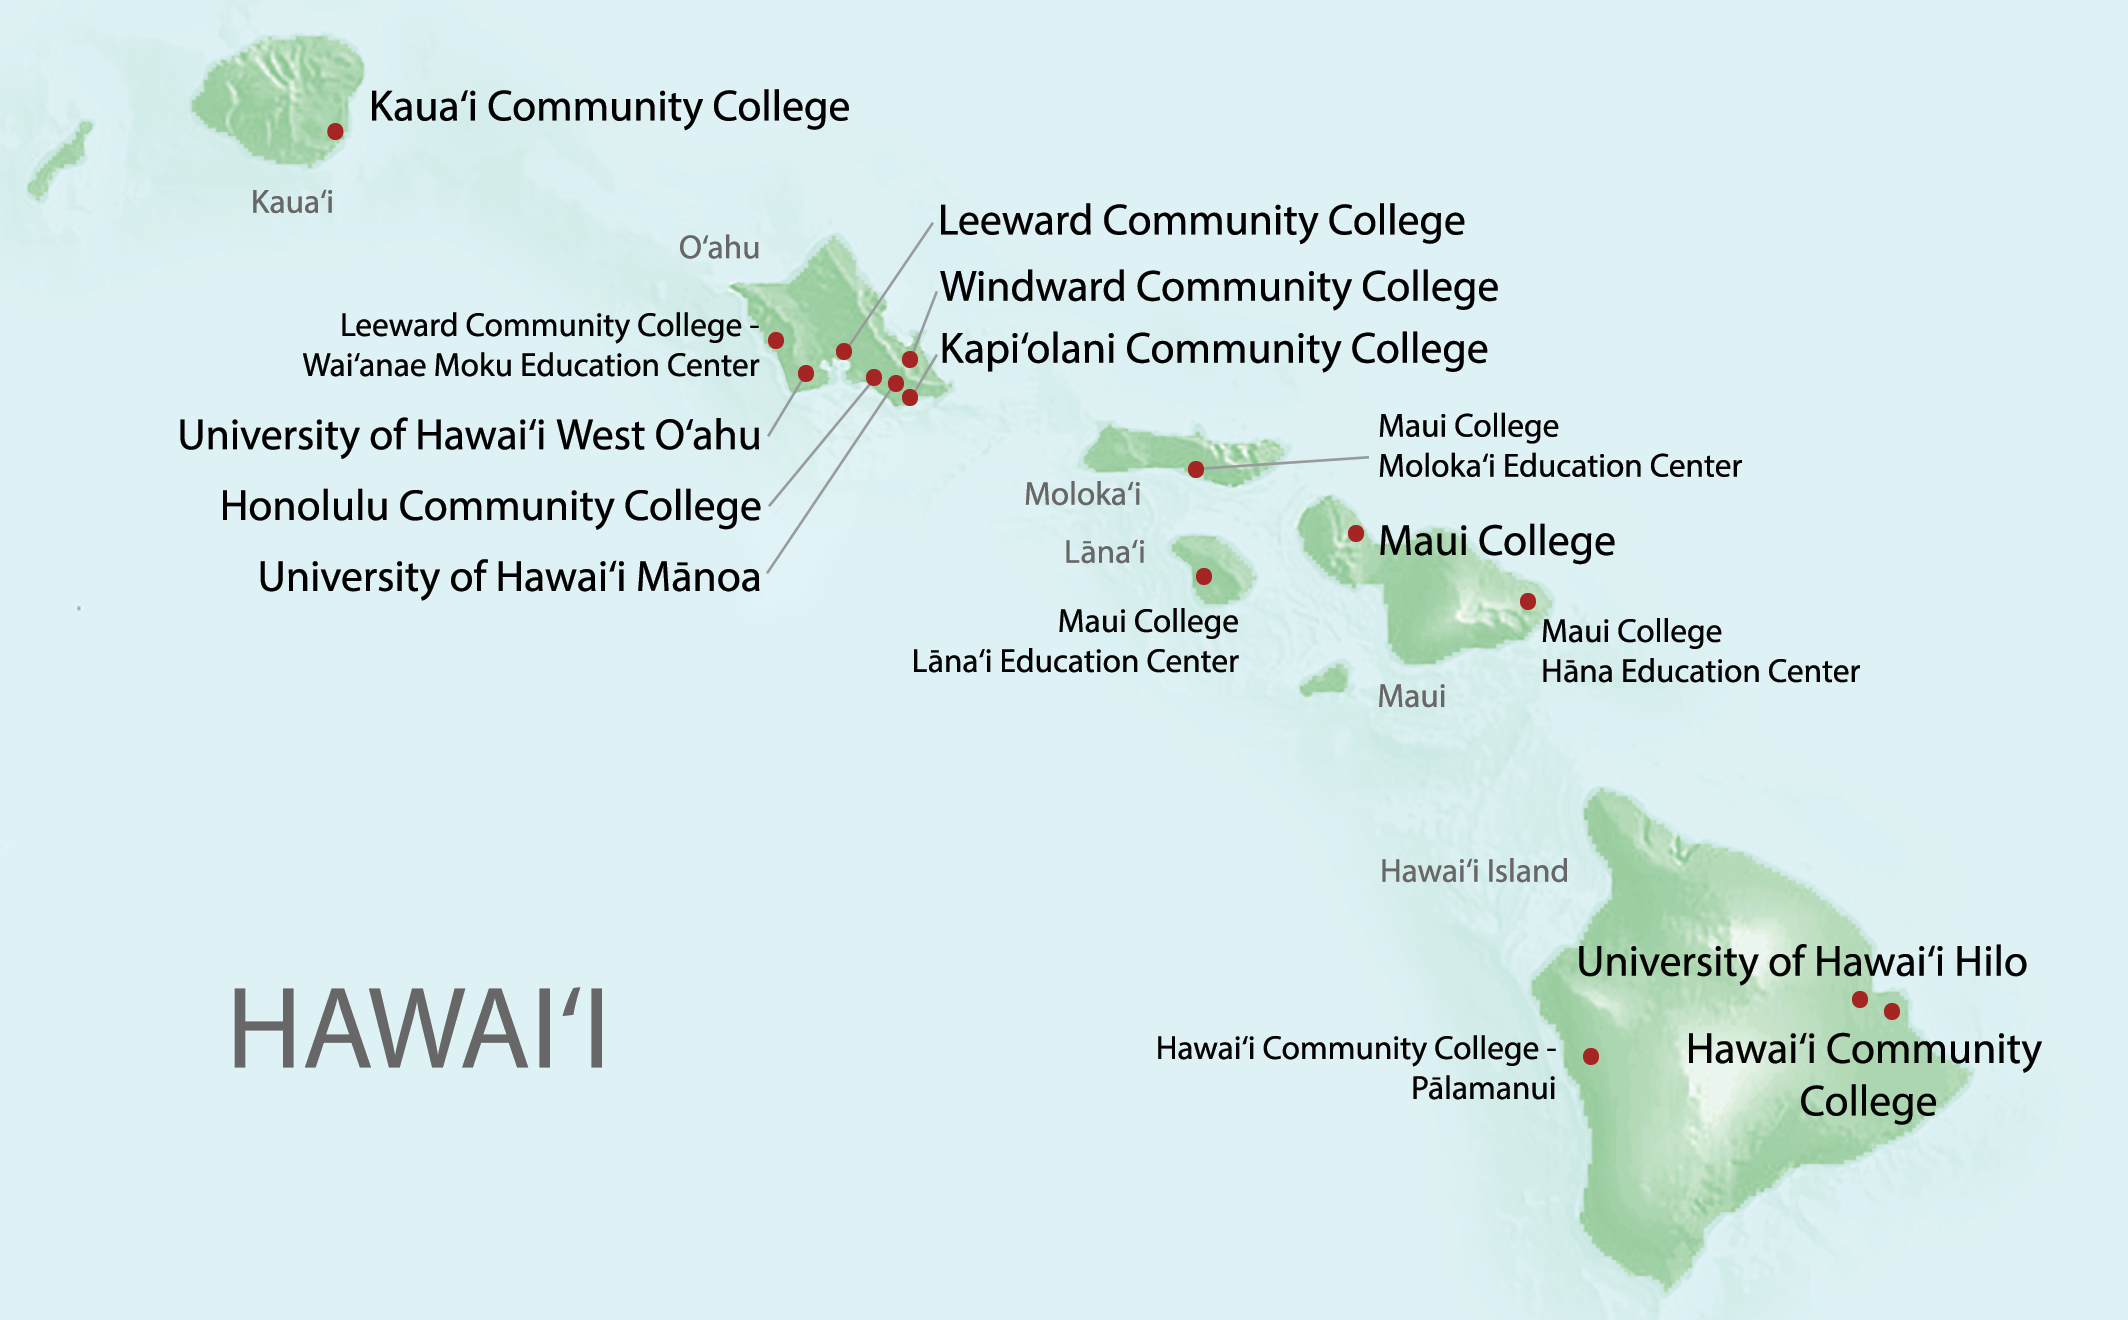 Map of University of Hawaii campuses to show on what island and where each university, college and education center is located.